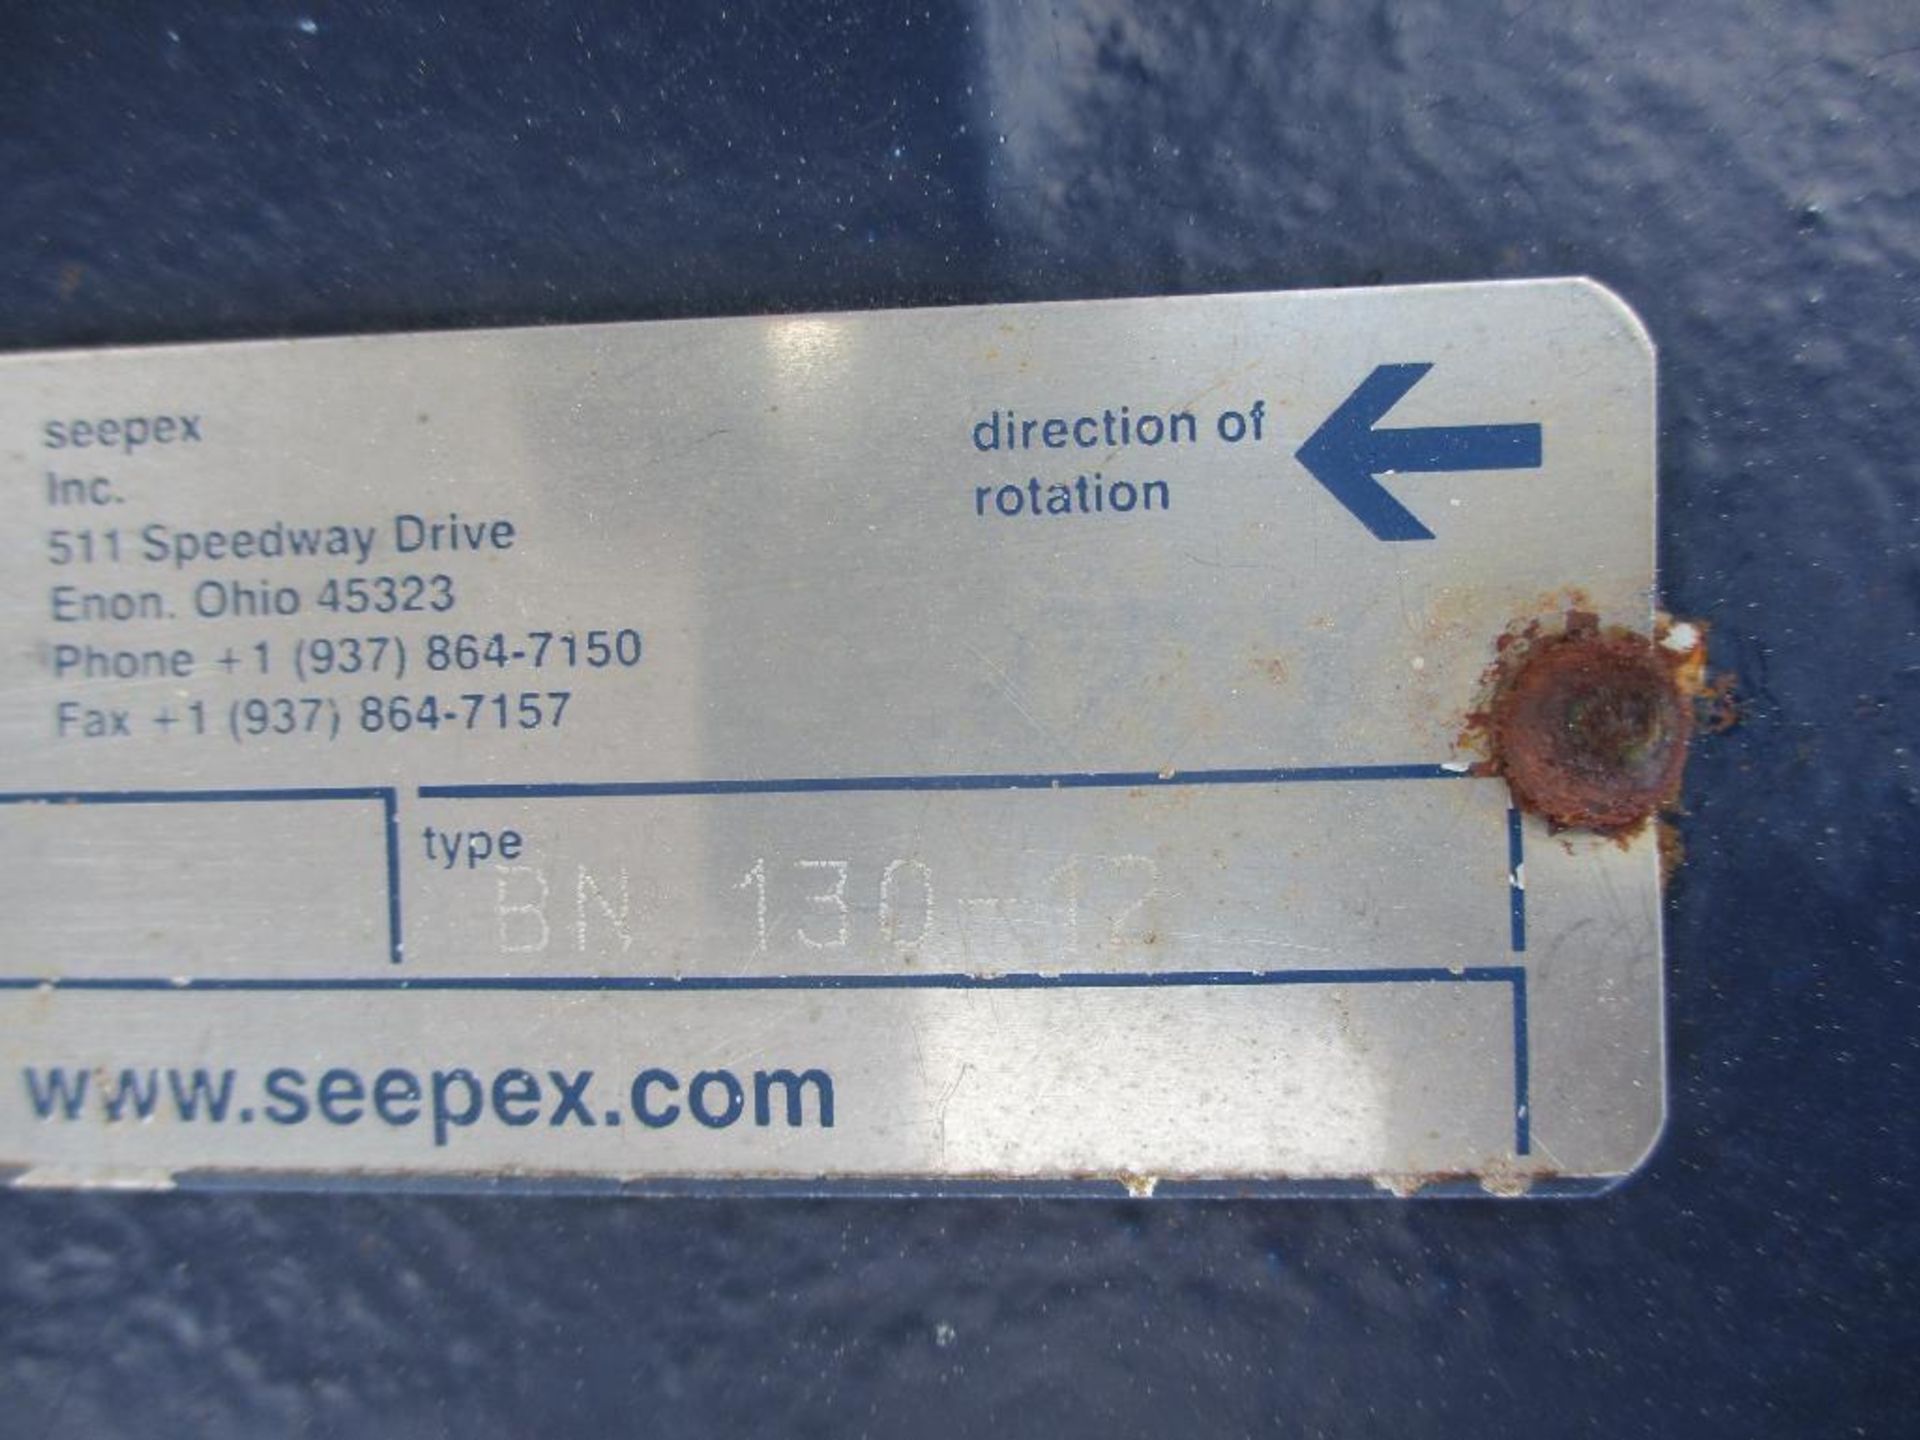 SeePex Pump w/ 50HP Motor, Approx. Weight: 2,000 LB. - Image 4 of 4